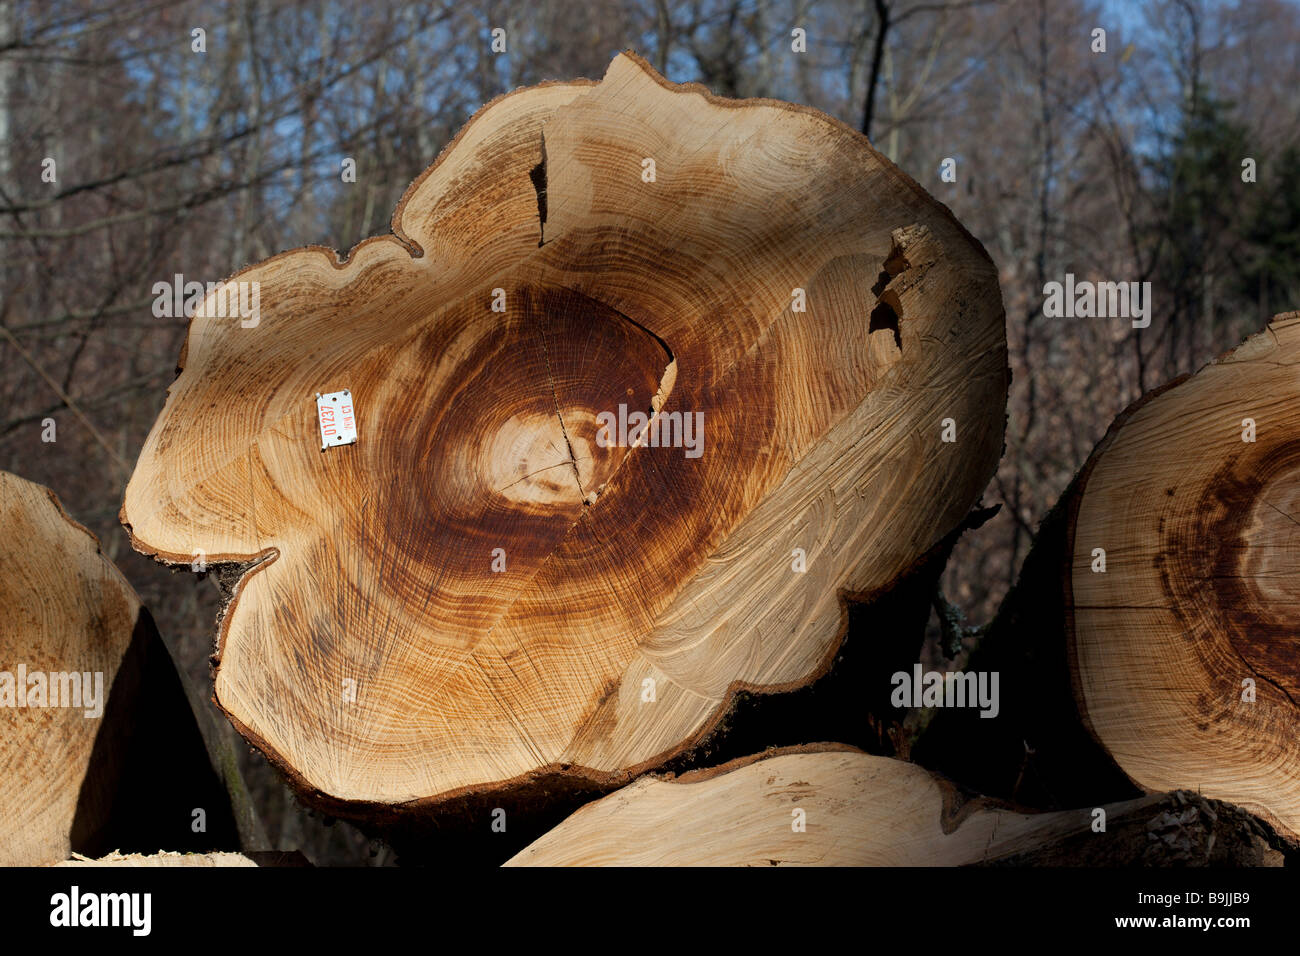 A pile of logs waits for removal from the forest where they were harvested Stock Photo